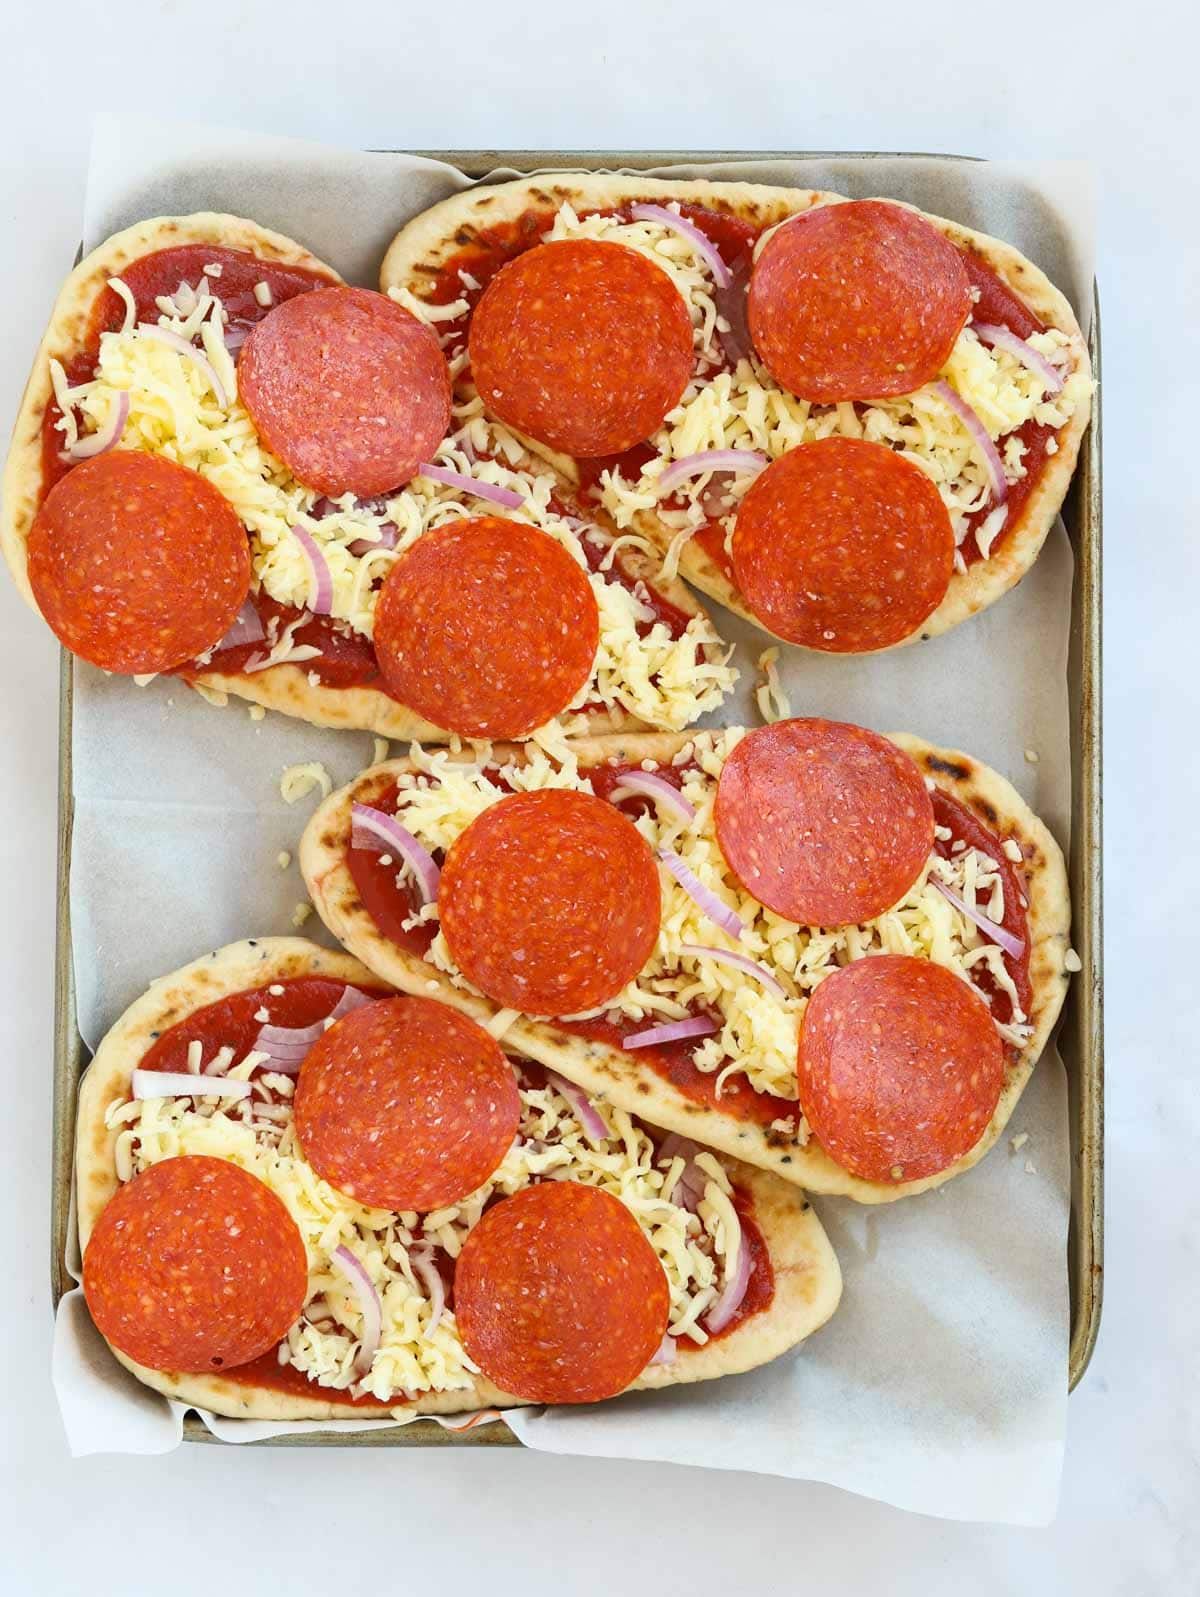 Easy naan bread pizzas topped with pepperoni before they go in the oven